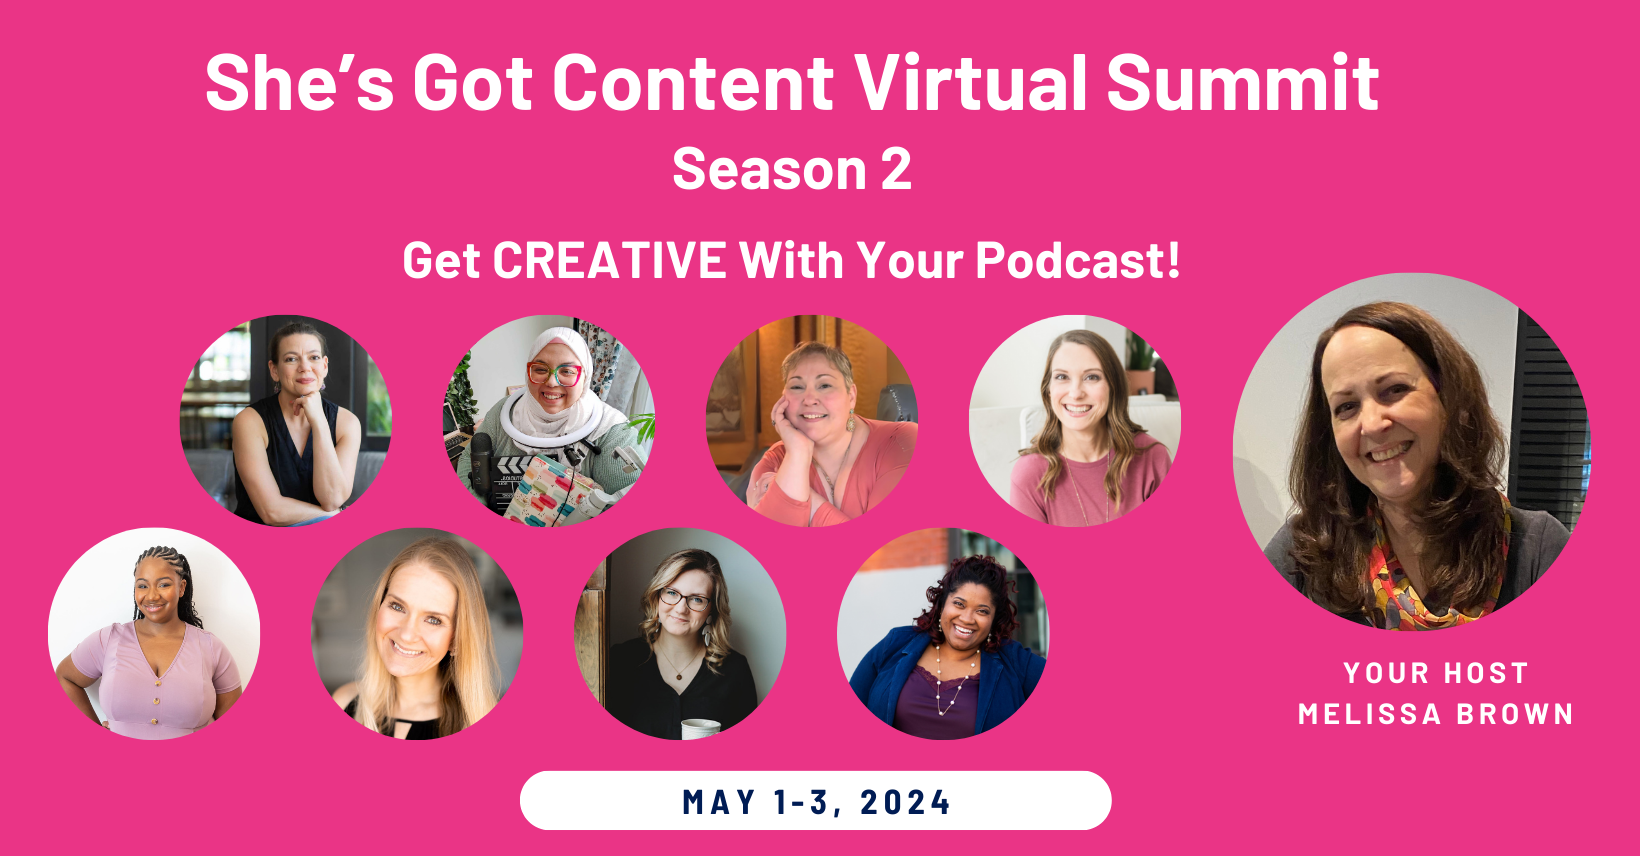 Promotional banner for "she's got content virtual summit season 2" featuring portraits of nine diverse women speakers and host melissa brown, with event dates may 1-3, 2024.